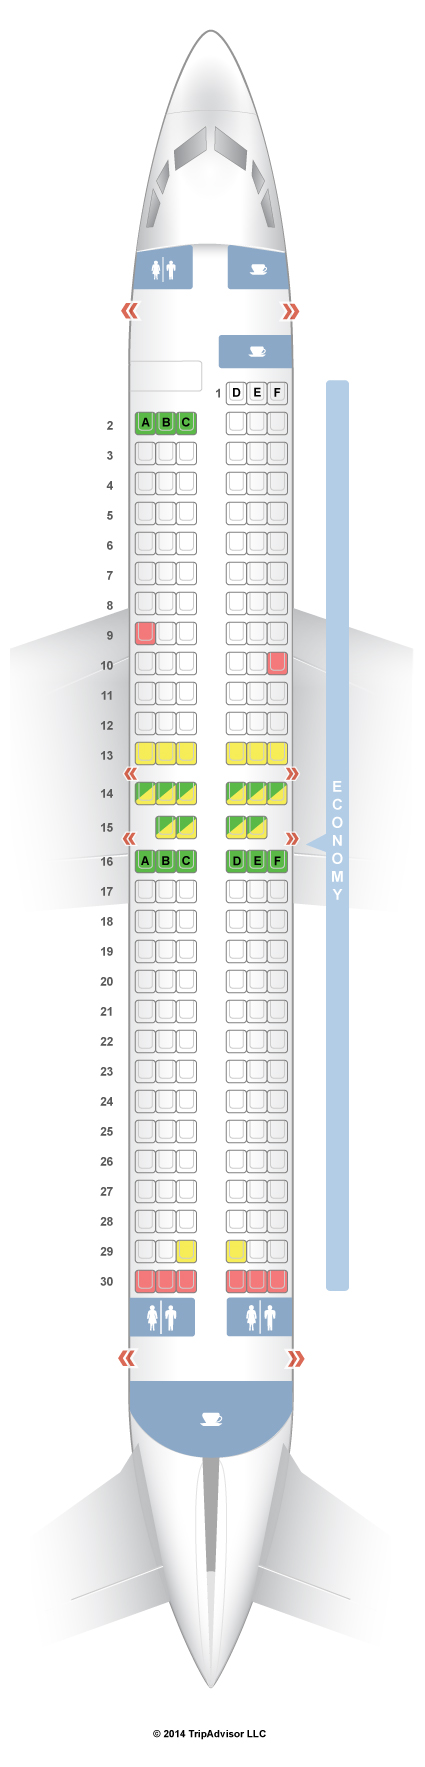 southwest airlines seat assignments